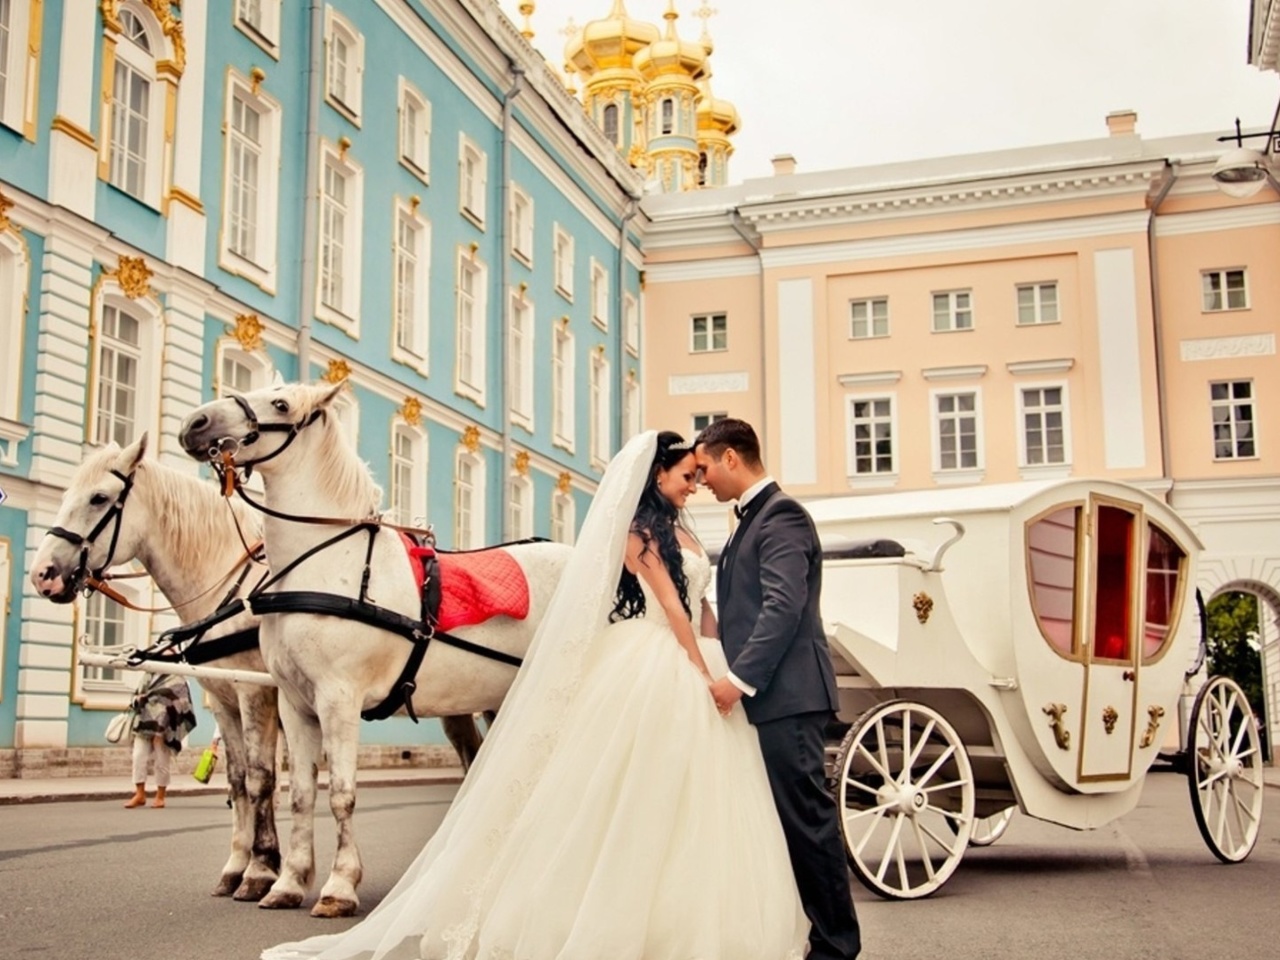 Wedding in carriage wallpaper 1280x960